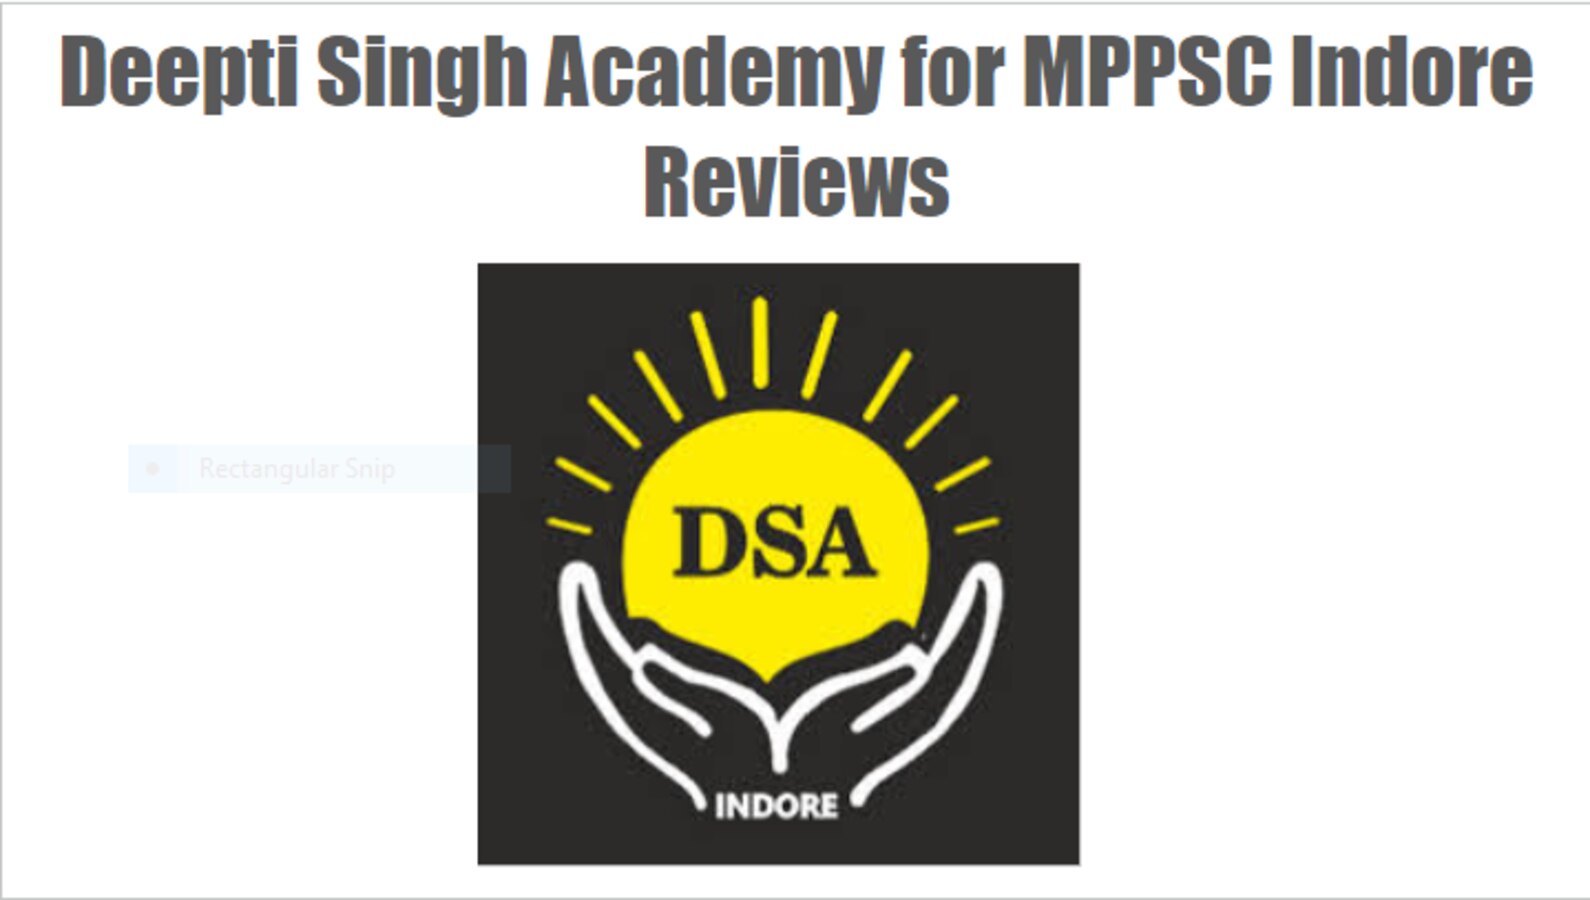 Deepti Singh Academy for MPPSC in Indore reviews